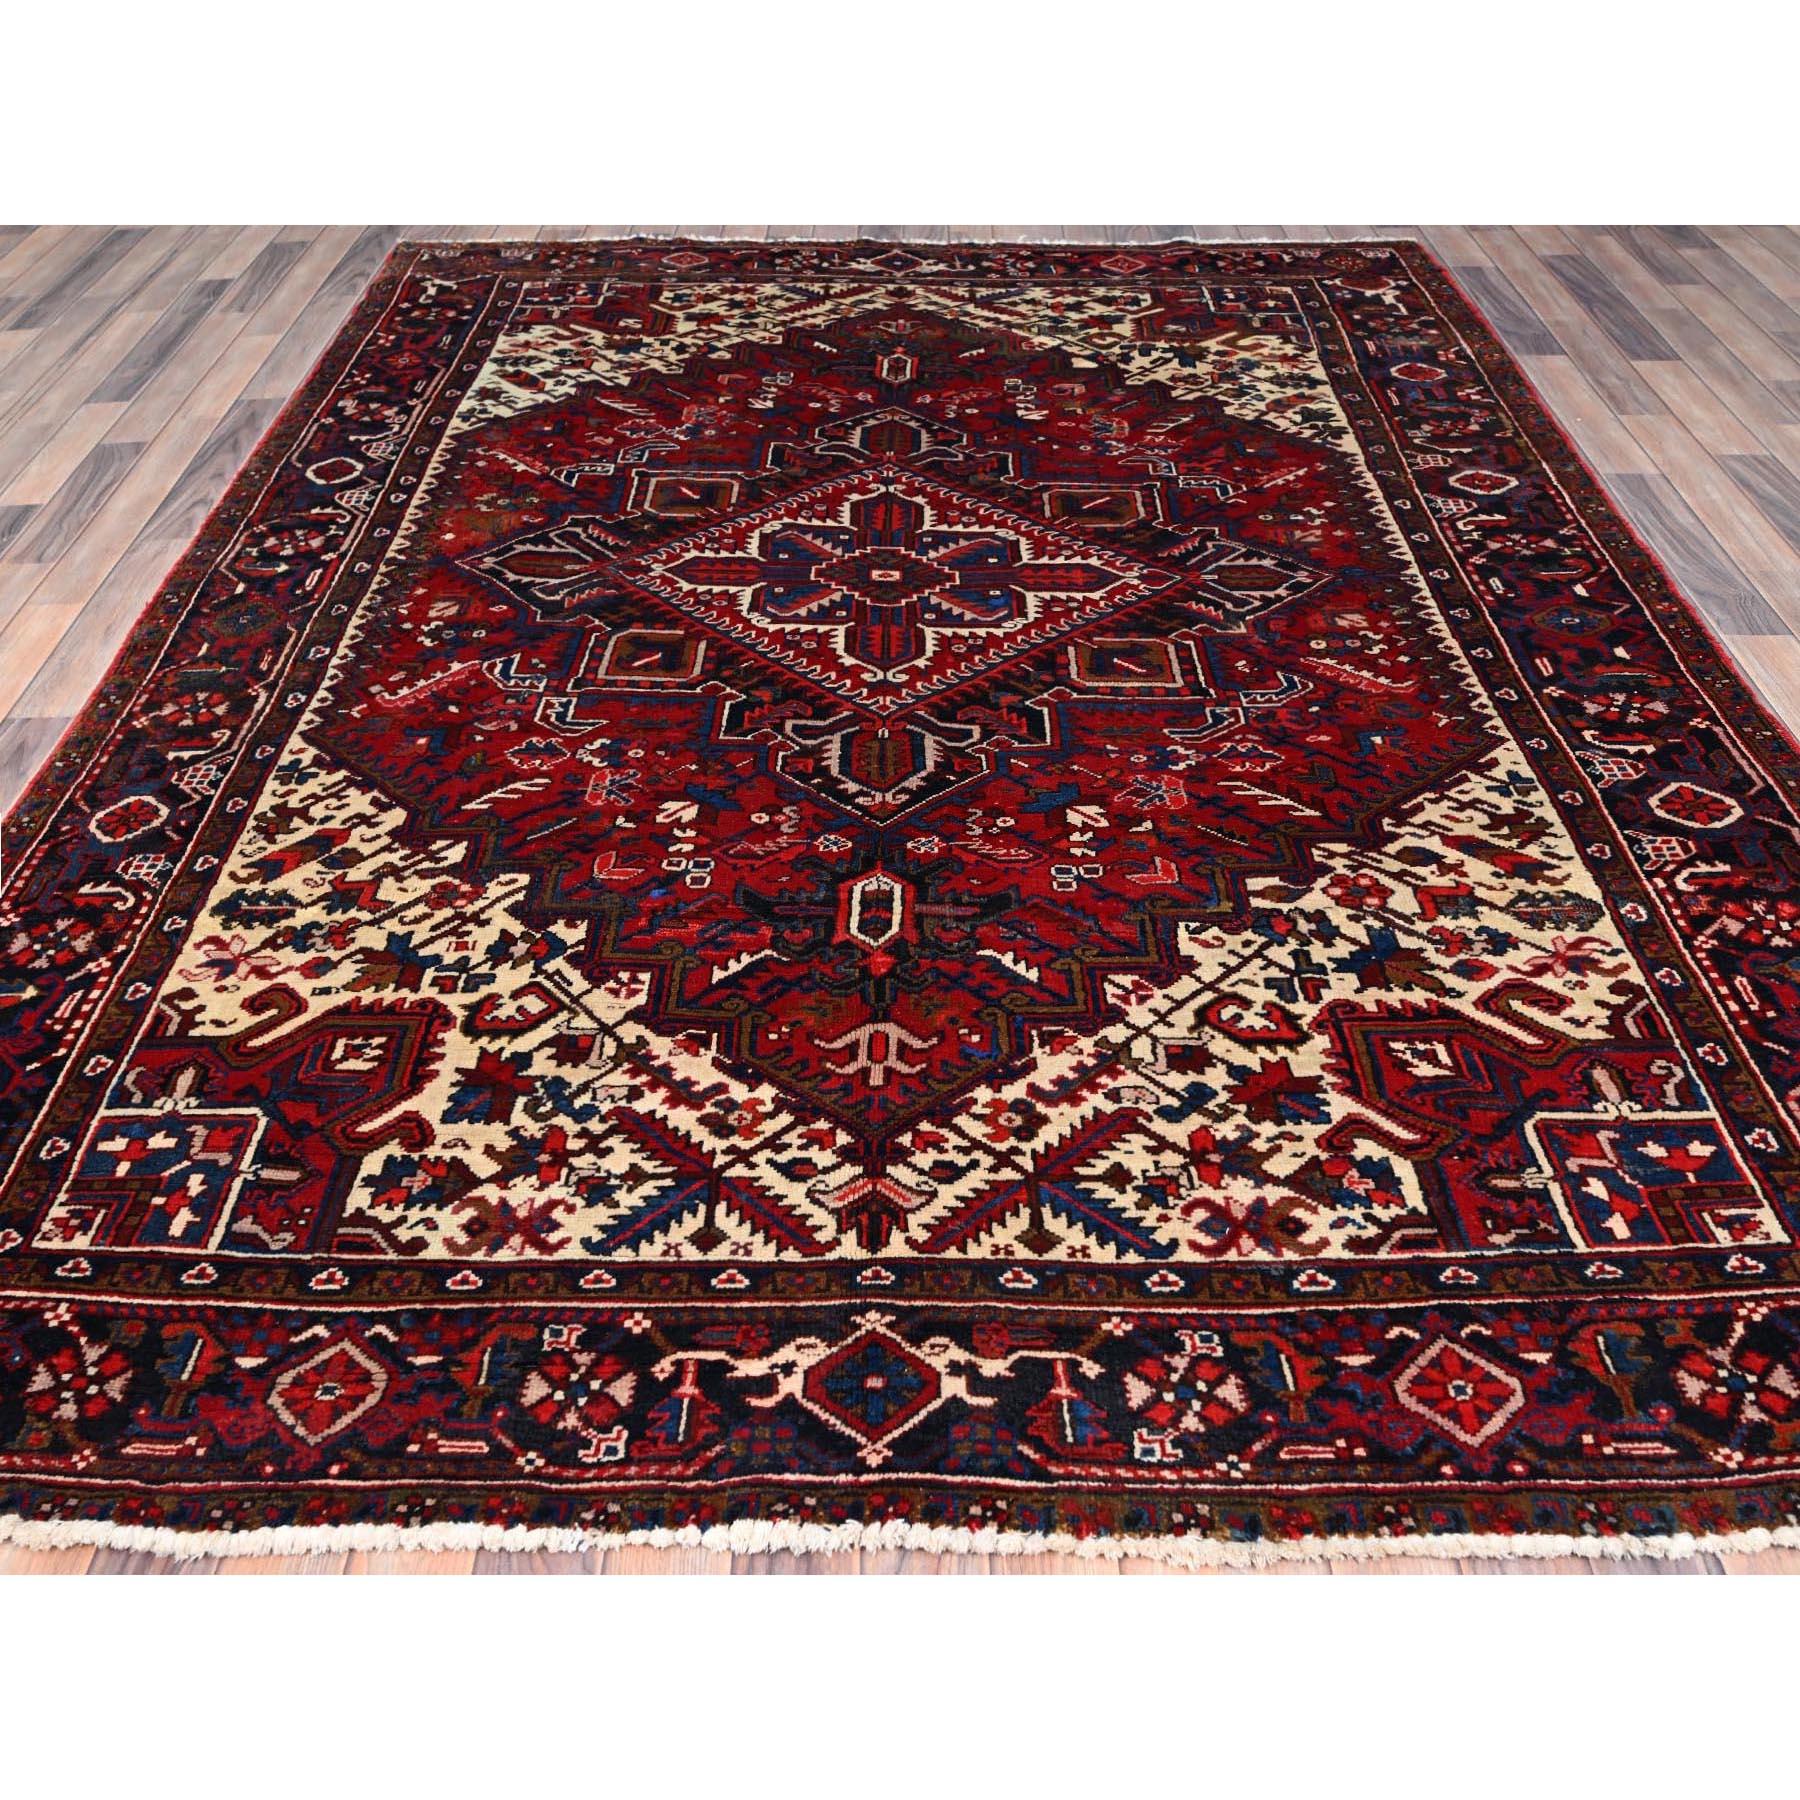 Medieval Red Professionally Cleaned Wool Evenly Worn Old Persian Heriz Hand Knotted Rug For Sale